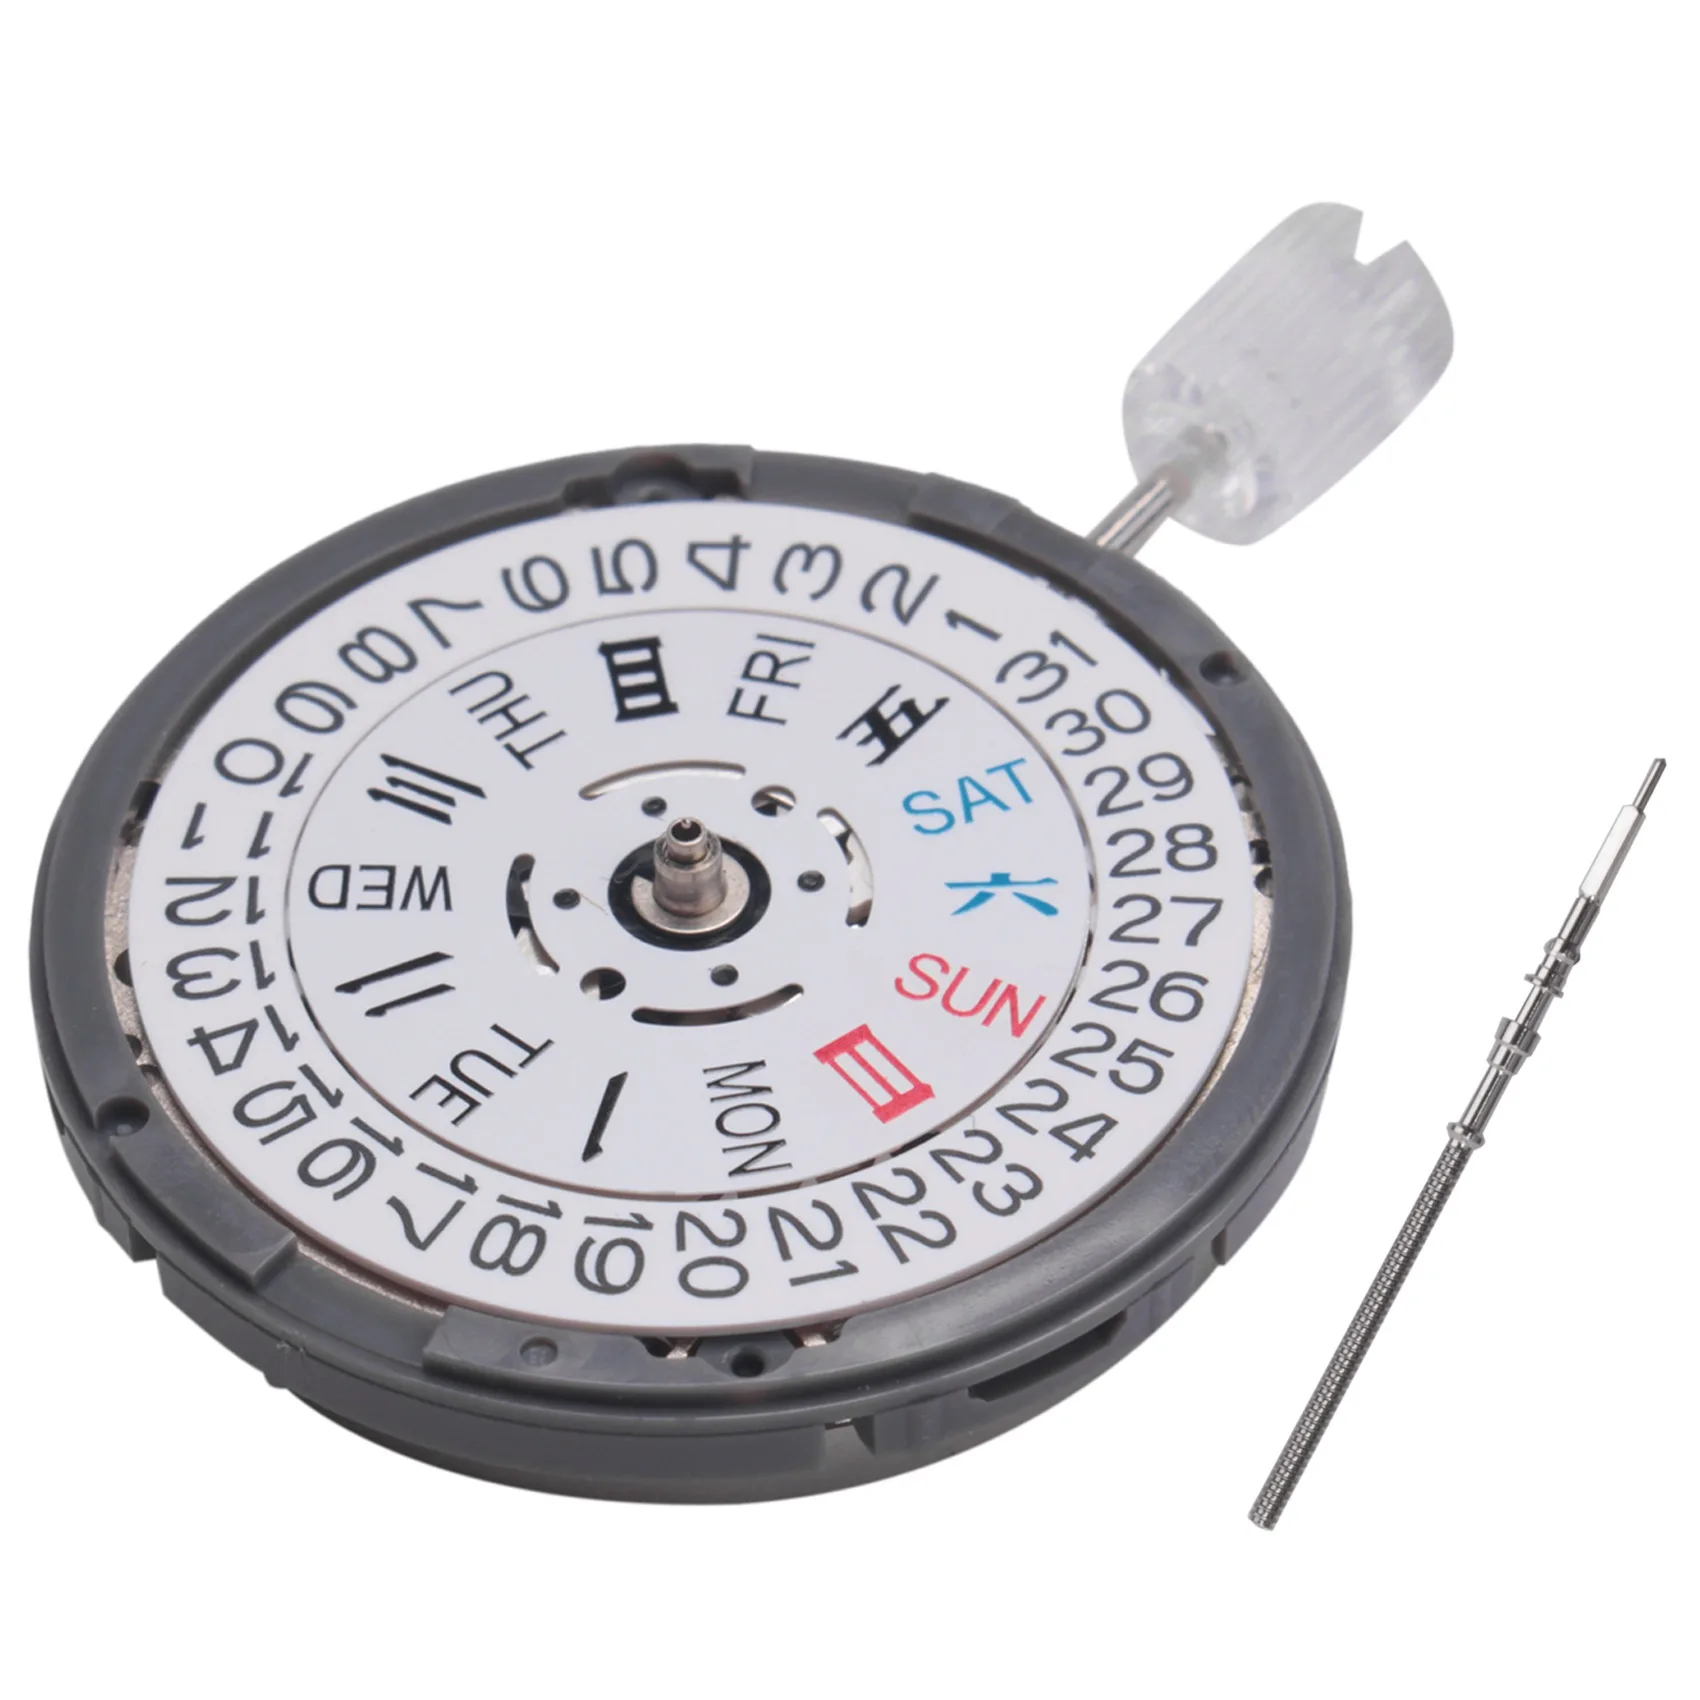 

Movement NH36 Crown At 3.8 O'Clock Mechanical Watch Replacement Movt for Diver's MOD Sub 24 Jewels White Date,Black Font